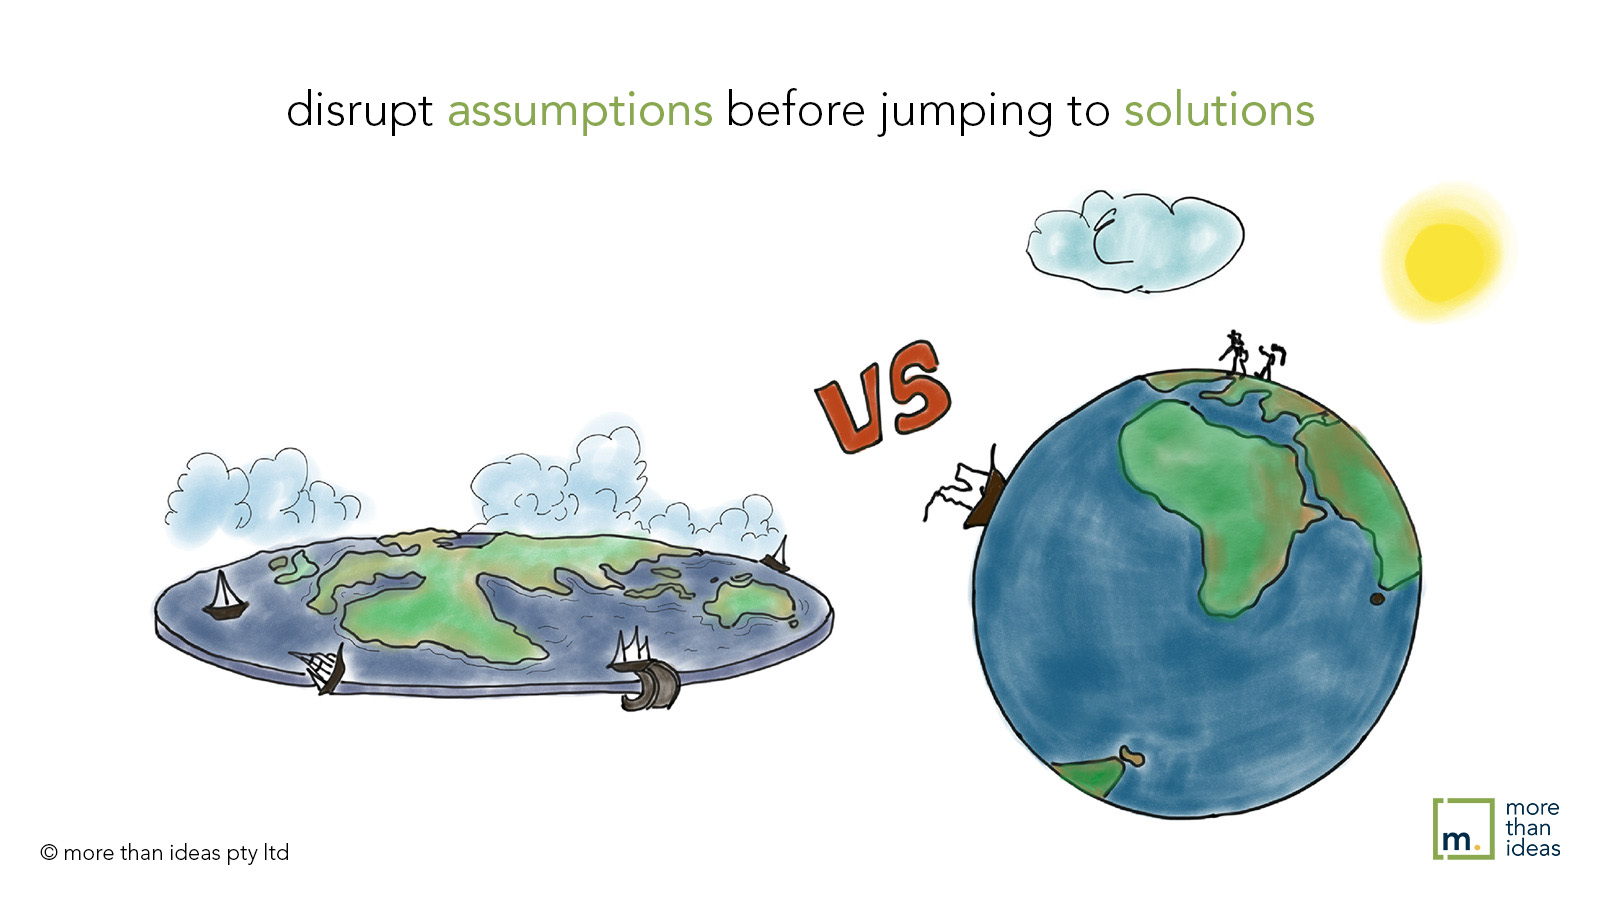 Image contains the text: Disrupt assumptions before jumping to solutions" over a flat Earth illustration featuring ships sailing off the edge in comparison with an image of a round Earth featuring 2 people and a ship journeying around it.